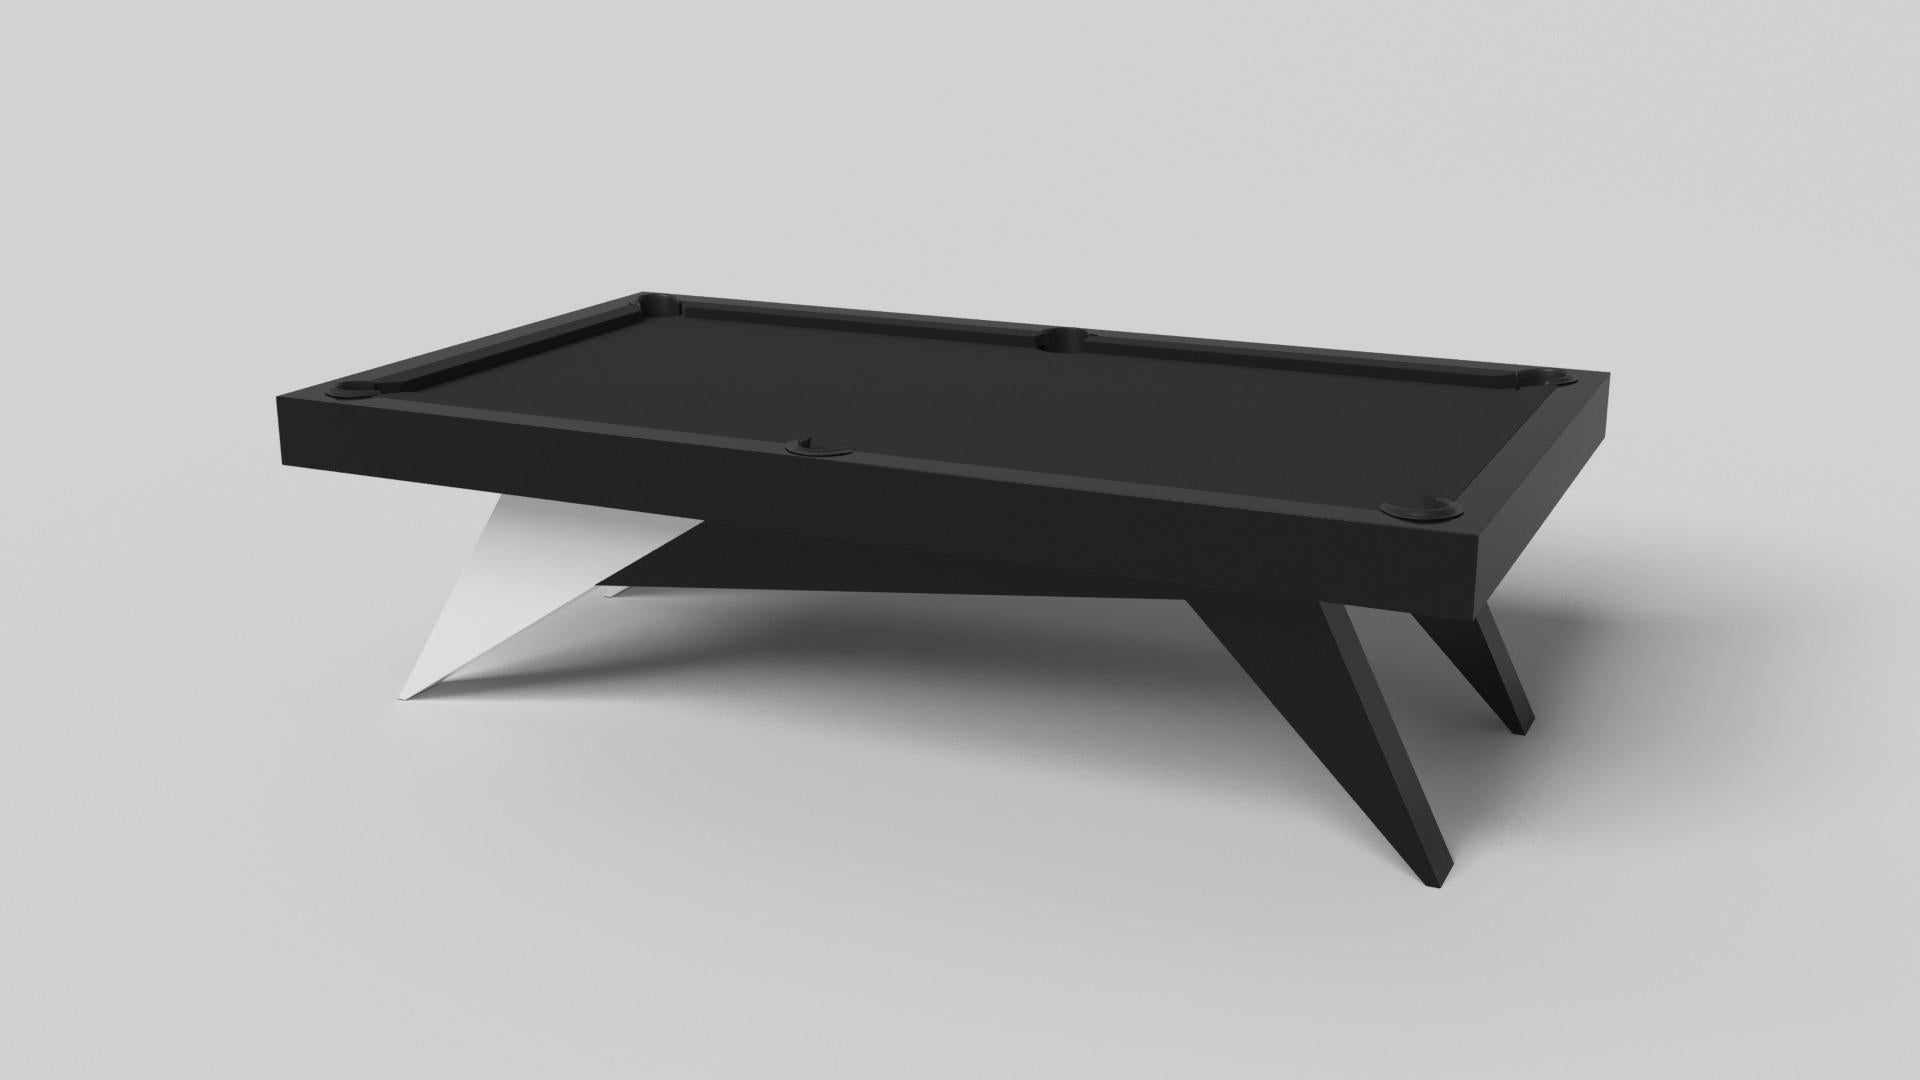 Simple yet sophisticated, the Mantis pool table in black with brushed aluminum puts a fresh, modern spin on a classic four-legged design. Sharp angles and tapered legs provide sleek stability, while contrast metal trim adds an air of exuberance and